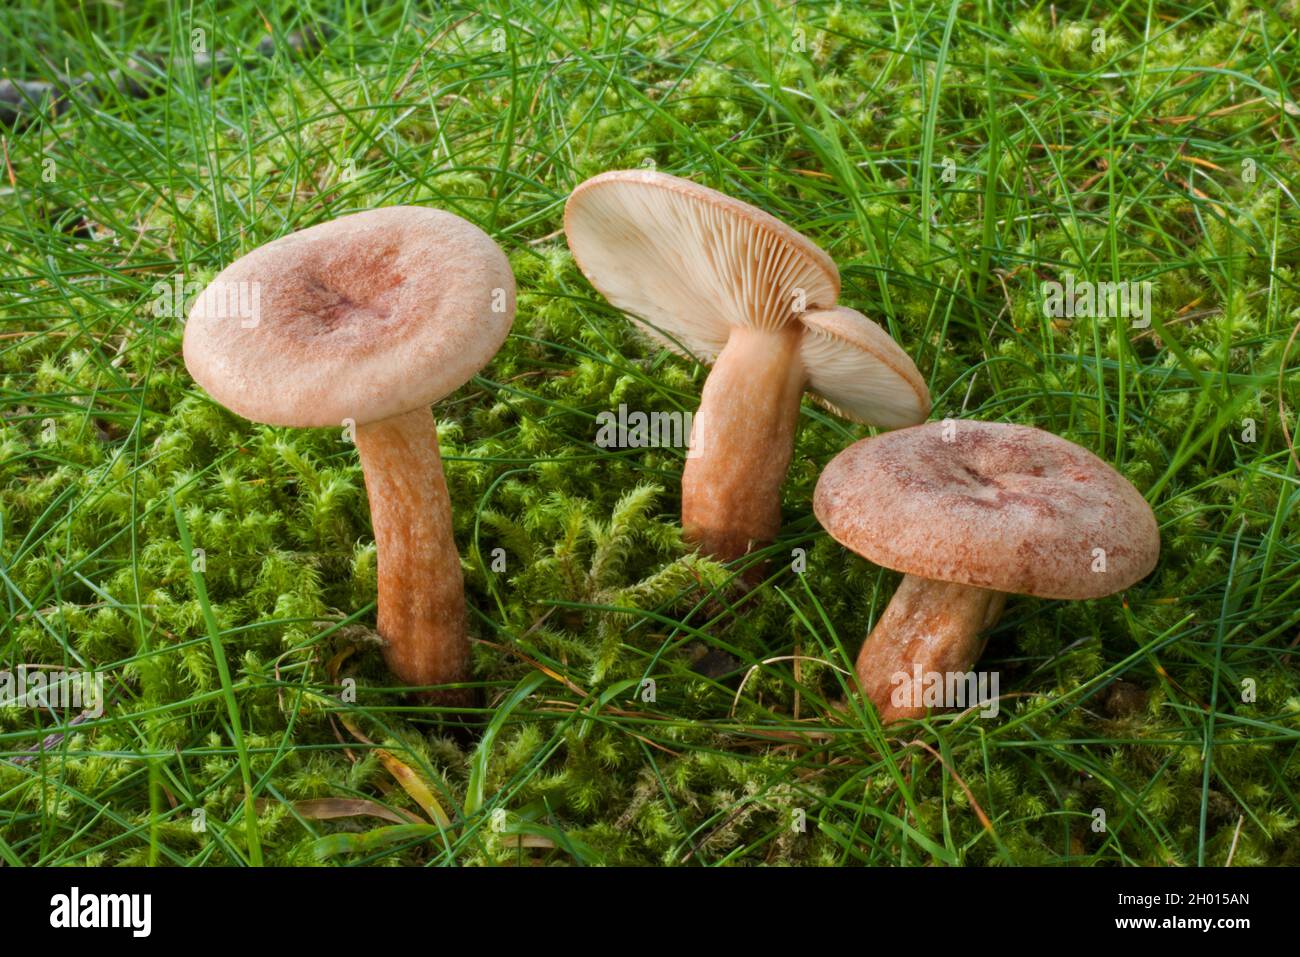 The fungus Lactarius quietus (oak milkcap) is found exclusively under oak trees and can be found in Europe and North America. Stock Photo